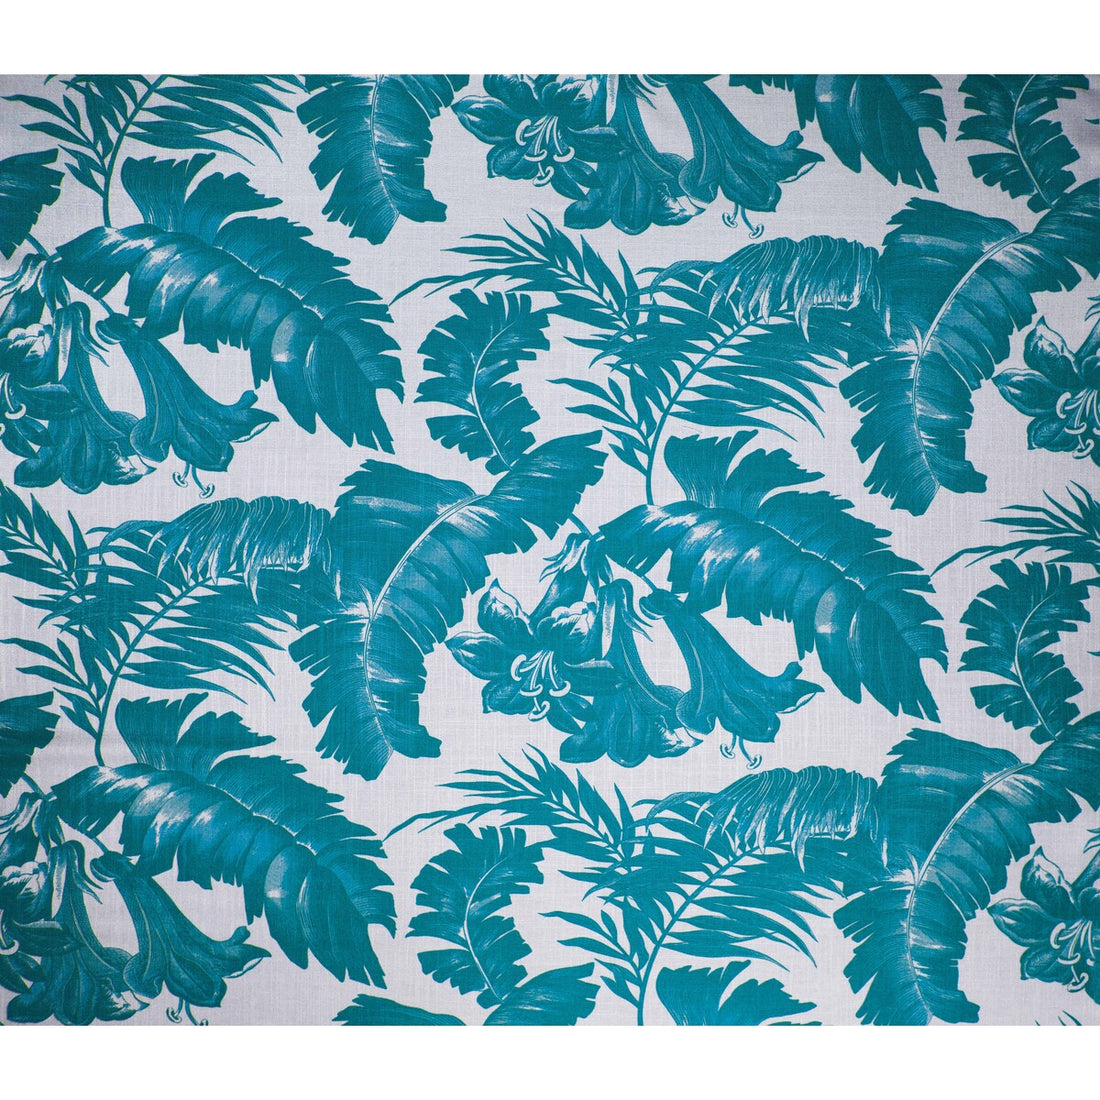 Plantation fabric in azul oceano color - pattern GDT5401.3.0 - by Gaston y Daniela in the Gaston Africalia collection